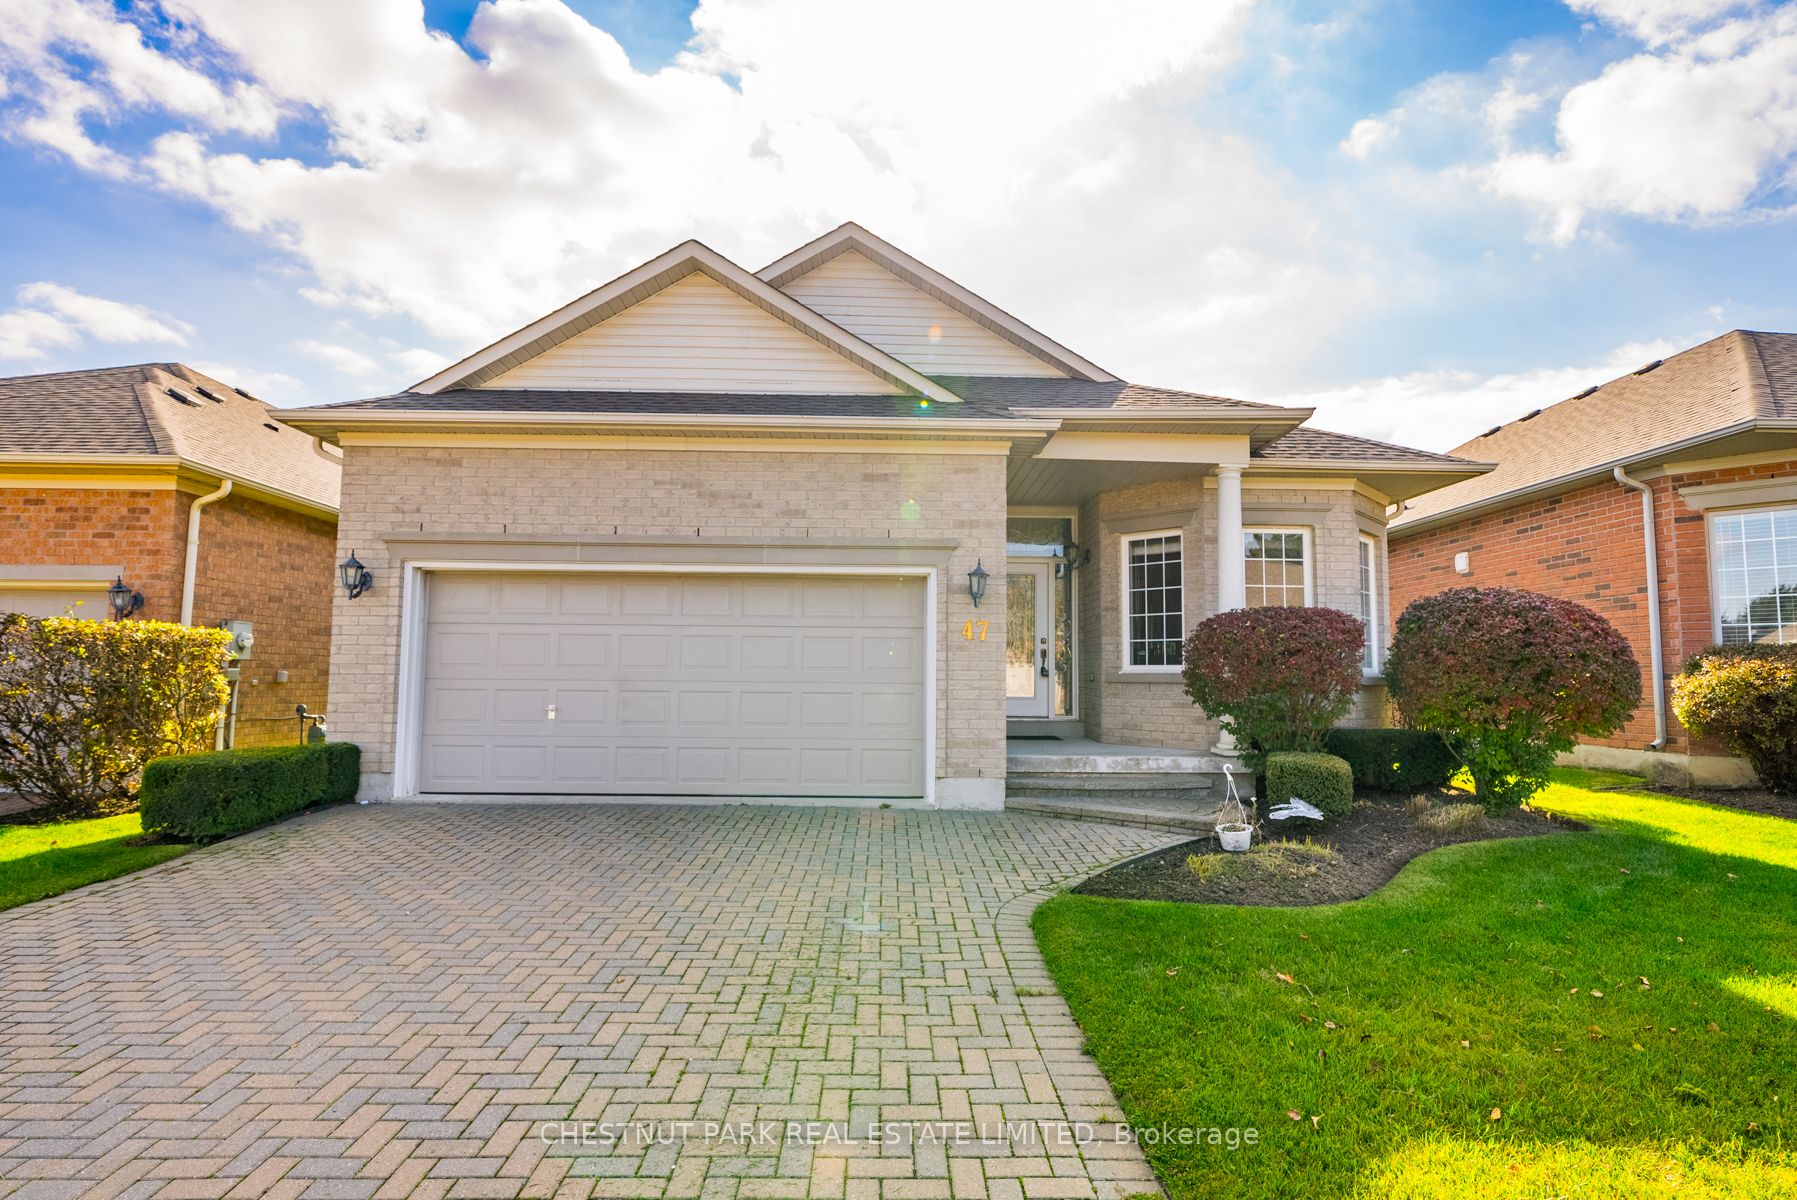 Detached house for sale at 47 Long Stan Whitchurch-Stouffville Ontario